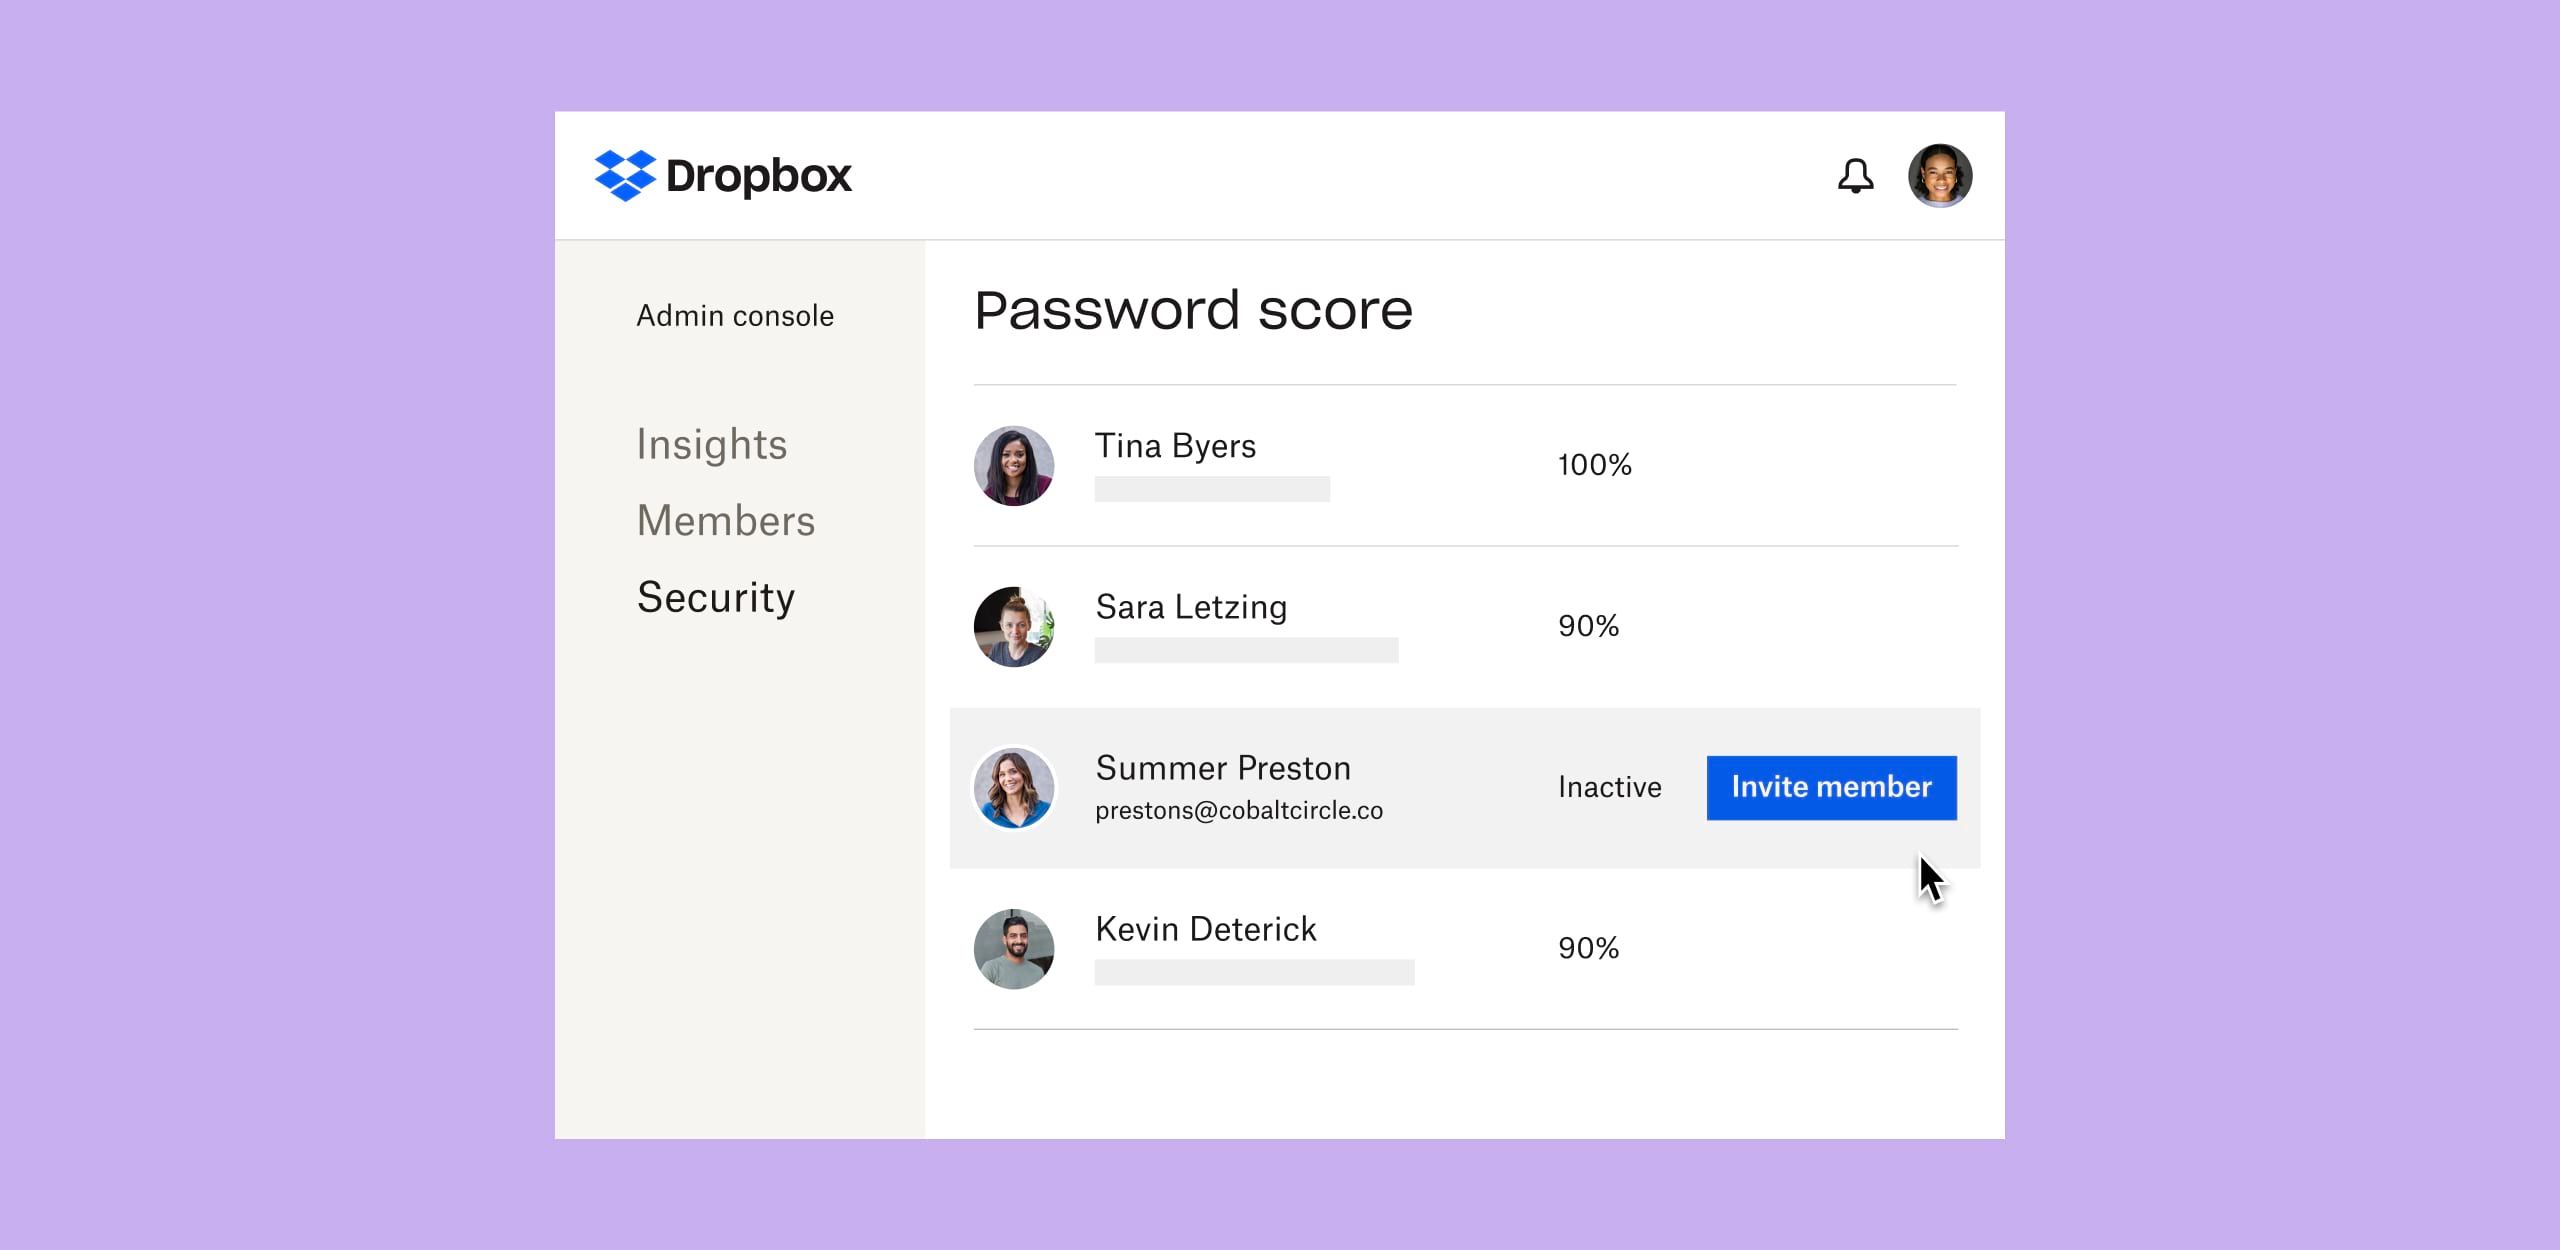 A Dropbox interface showing individual users’ password scores and a blue button labeled “invite member” next to an inactive user profile